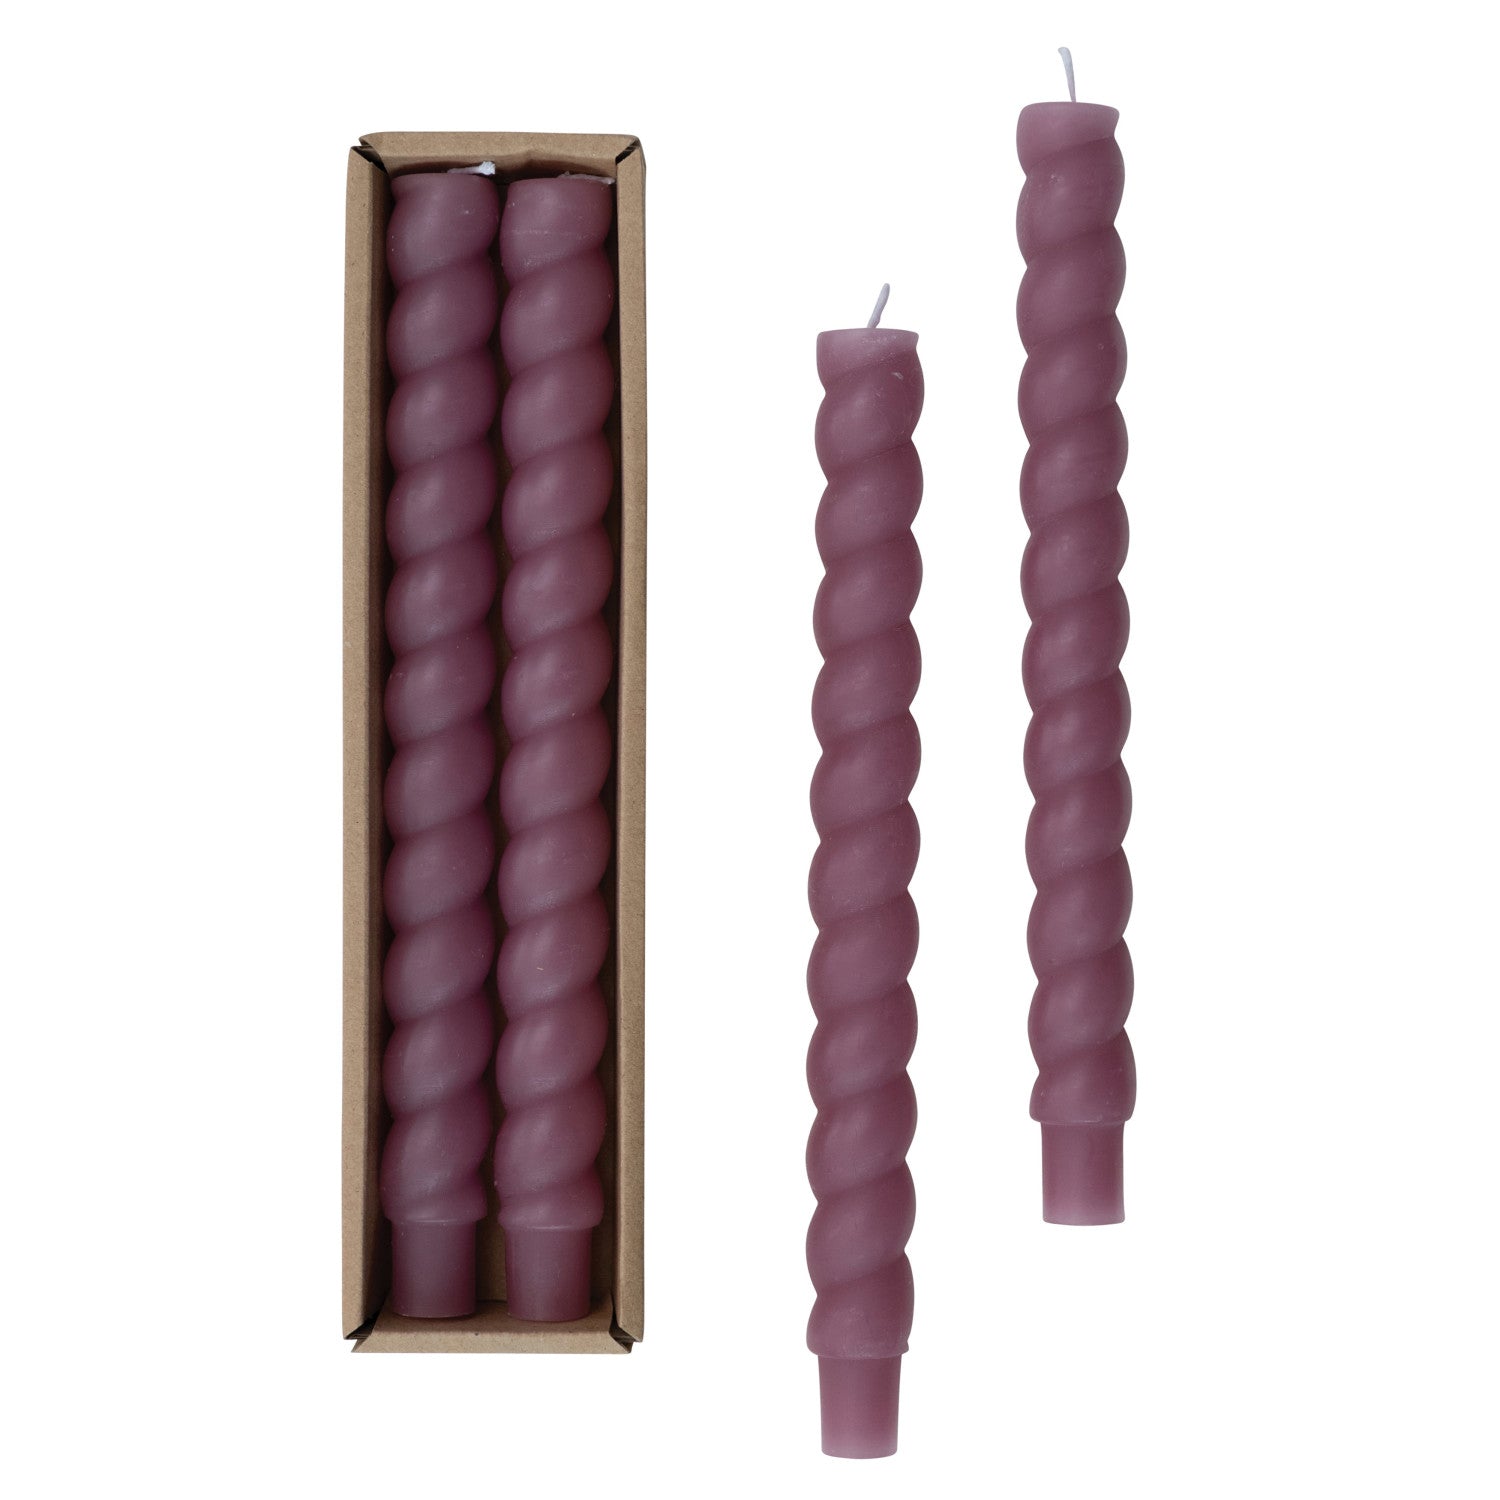 Unscented Cabernet Twisted Taper Candles*